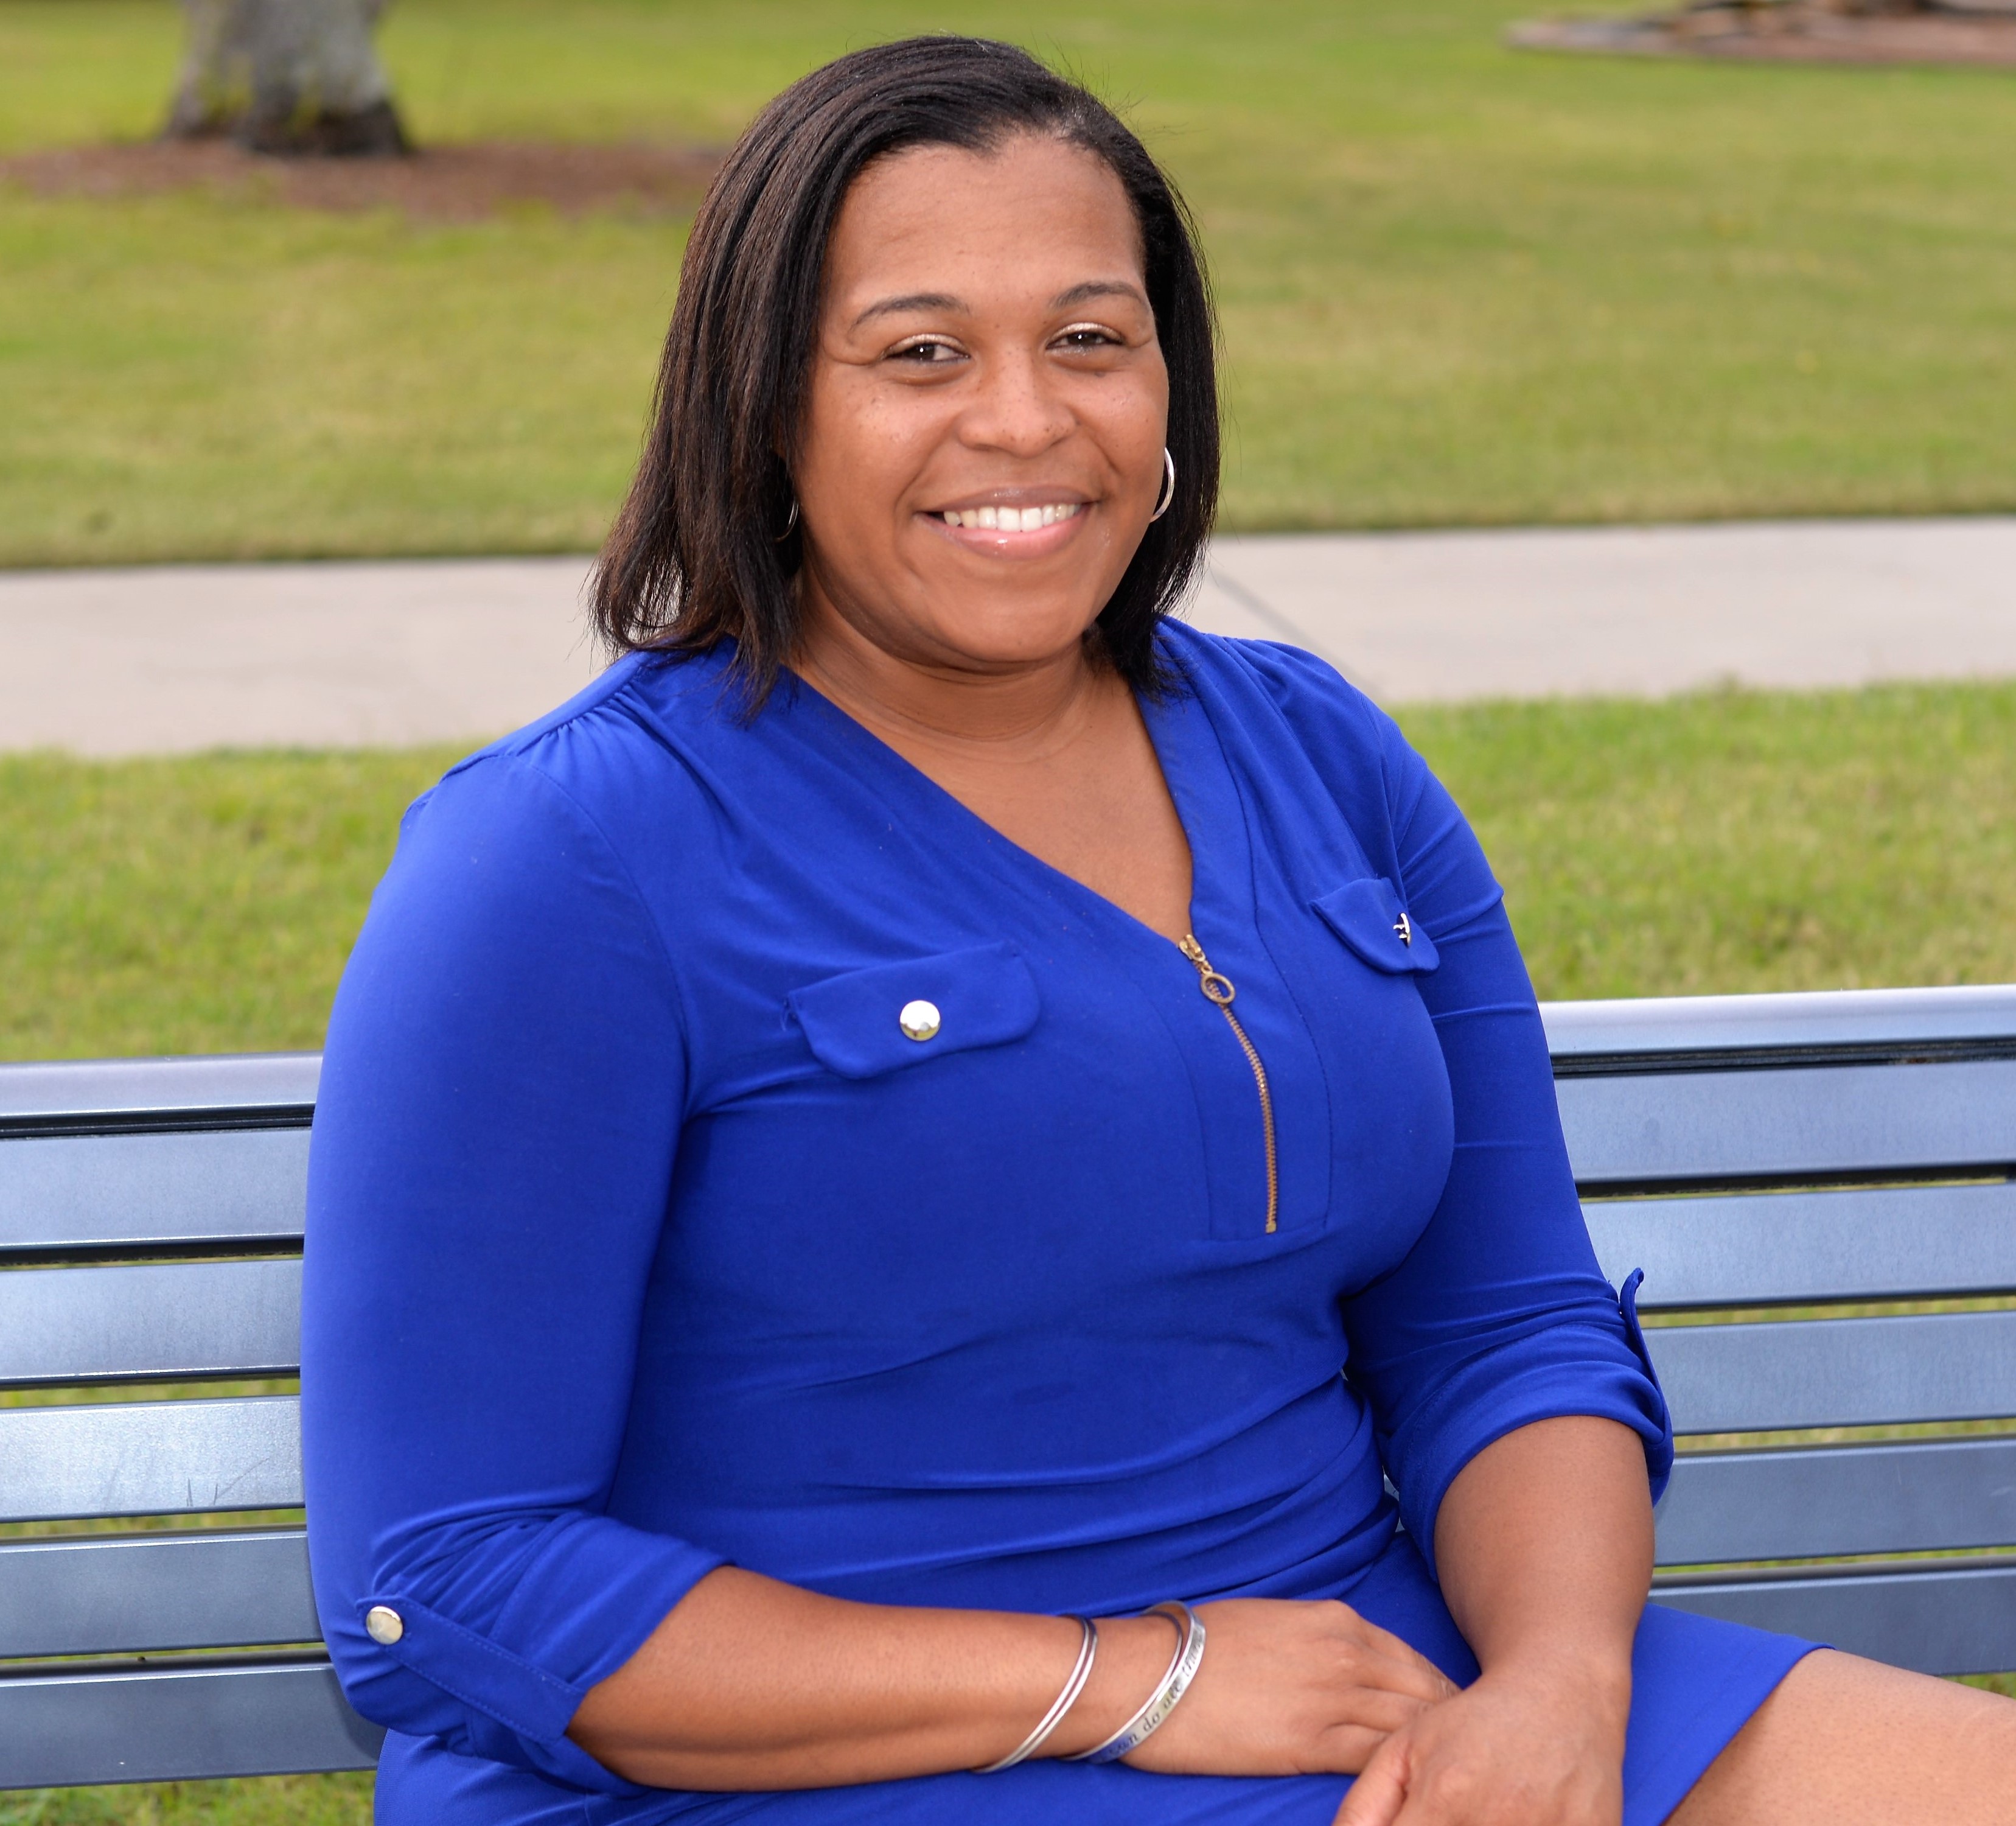 College of Coastal Georgia senior Sheri Goss will earn her bachelor's degree in general business this December.